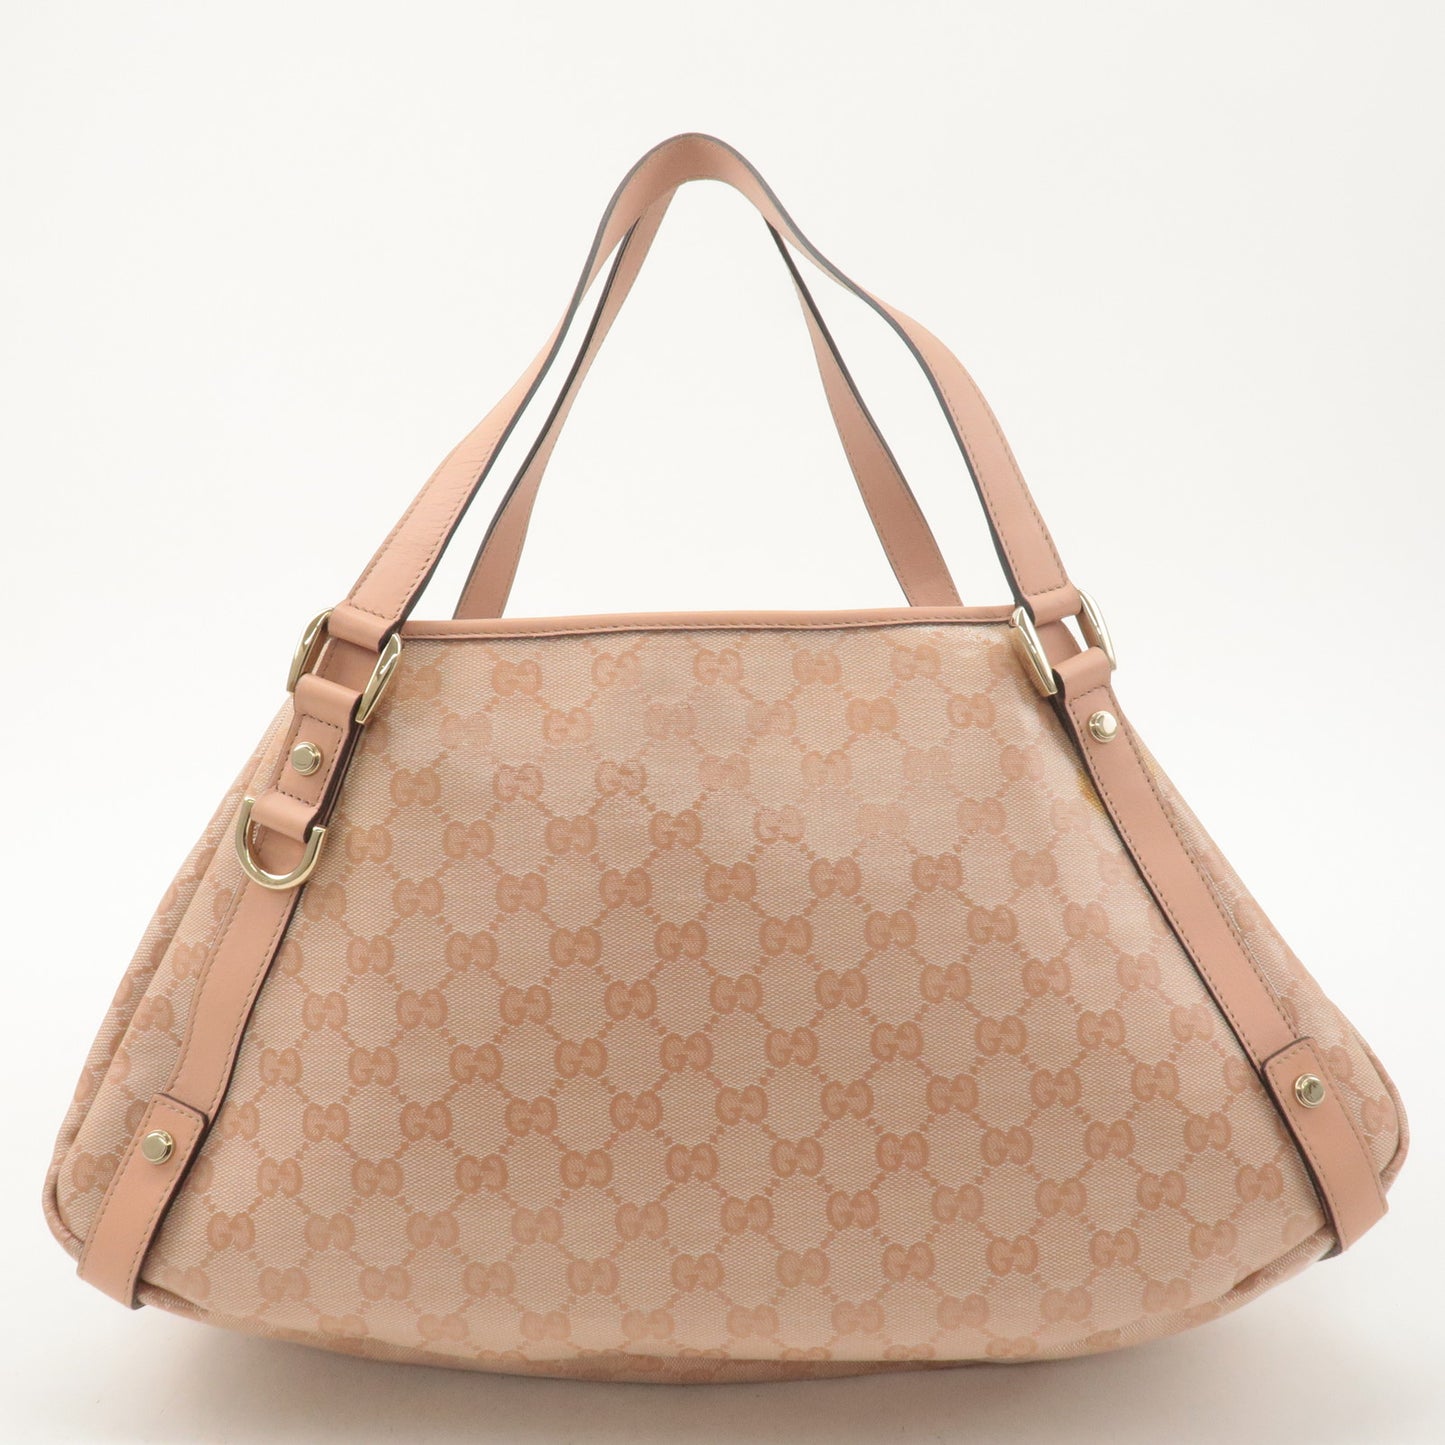 GUCCI Abbey GG Crystal Leather Tote Hand Bag Pink 130736